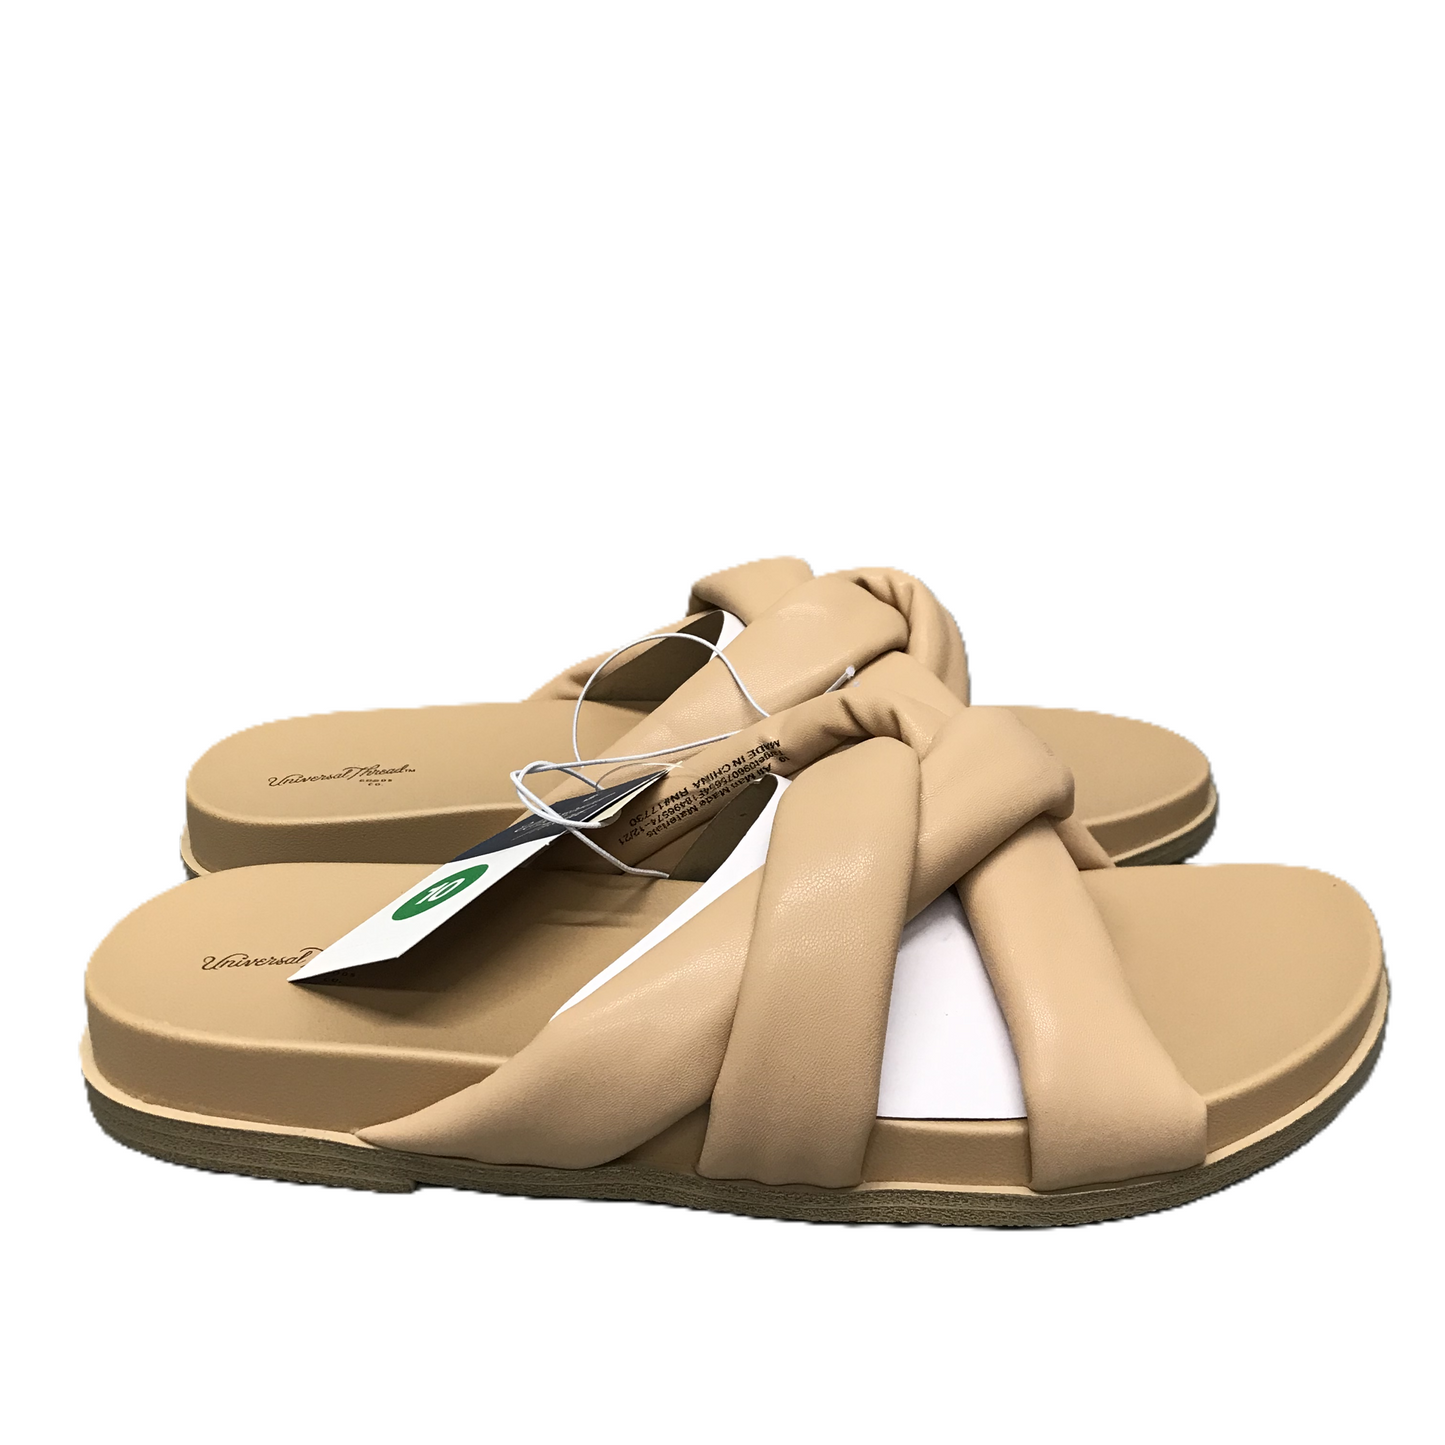 Tan Sandals Flats By Universal Thread, Size: 10